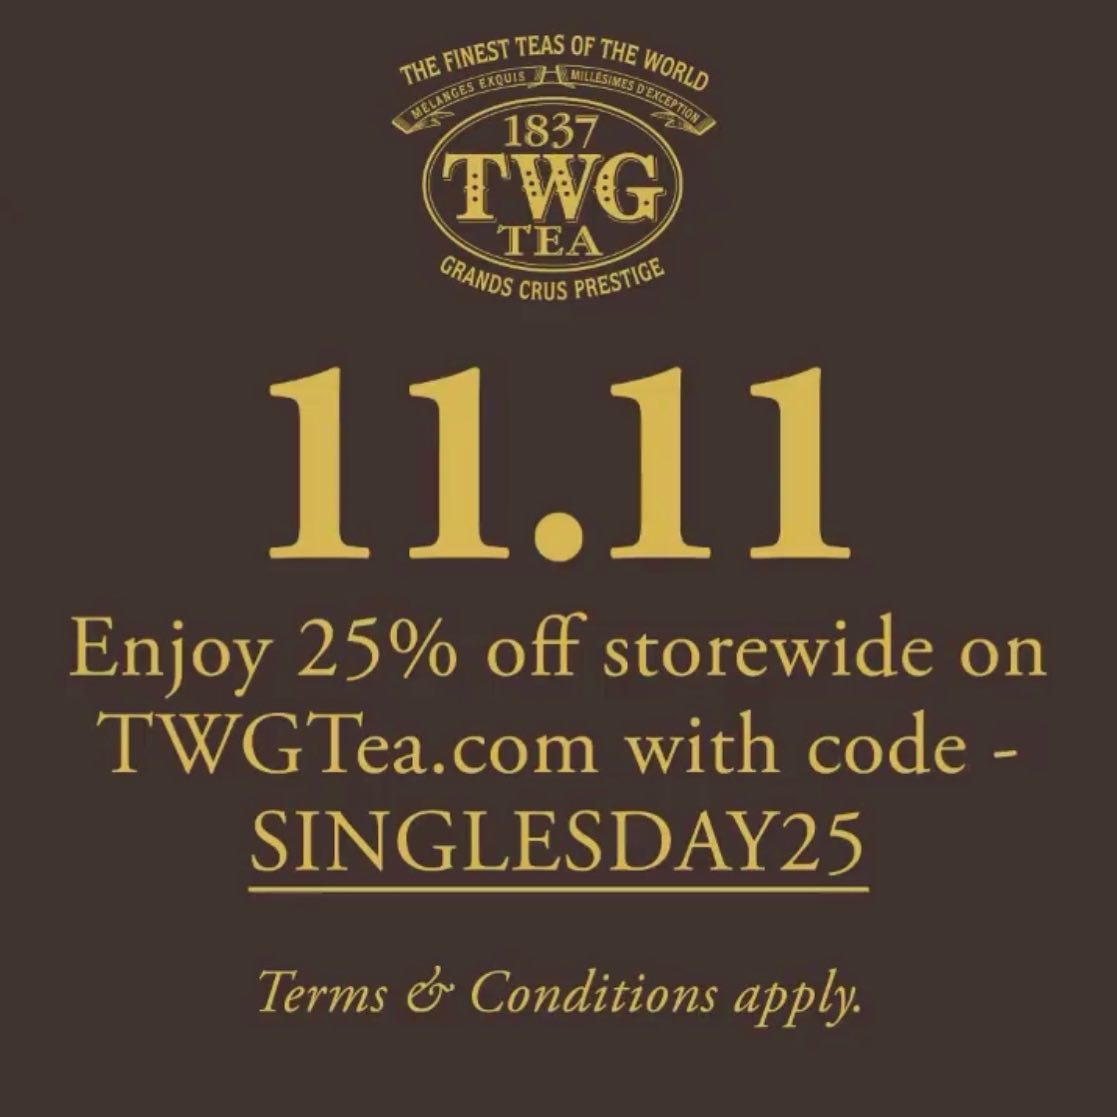 Shop now on TWGTea.com and enjoy 25% off your entire purchase using promotional code “SINGLESDAY25”. Valid through 11 Nov, 23.59pm (SGT). Terms & Conditions apply. 